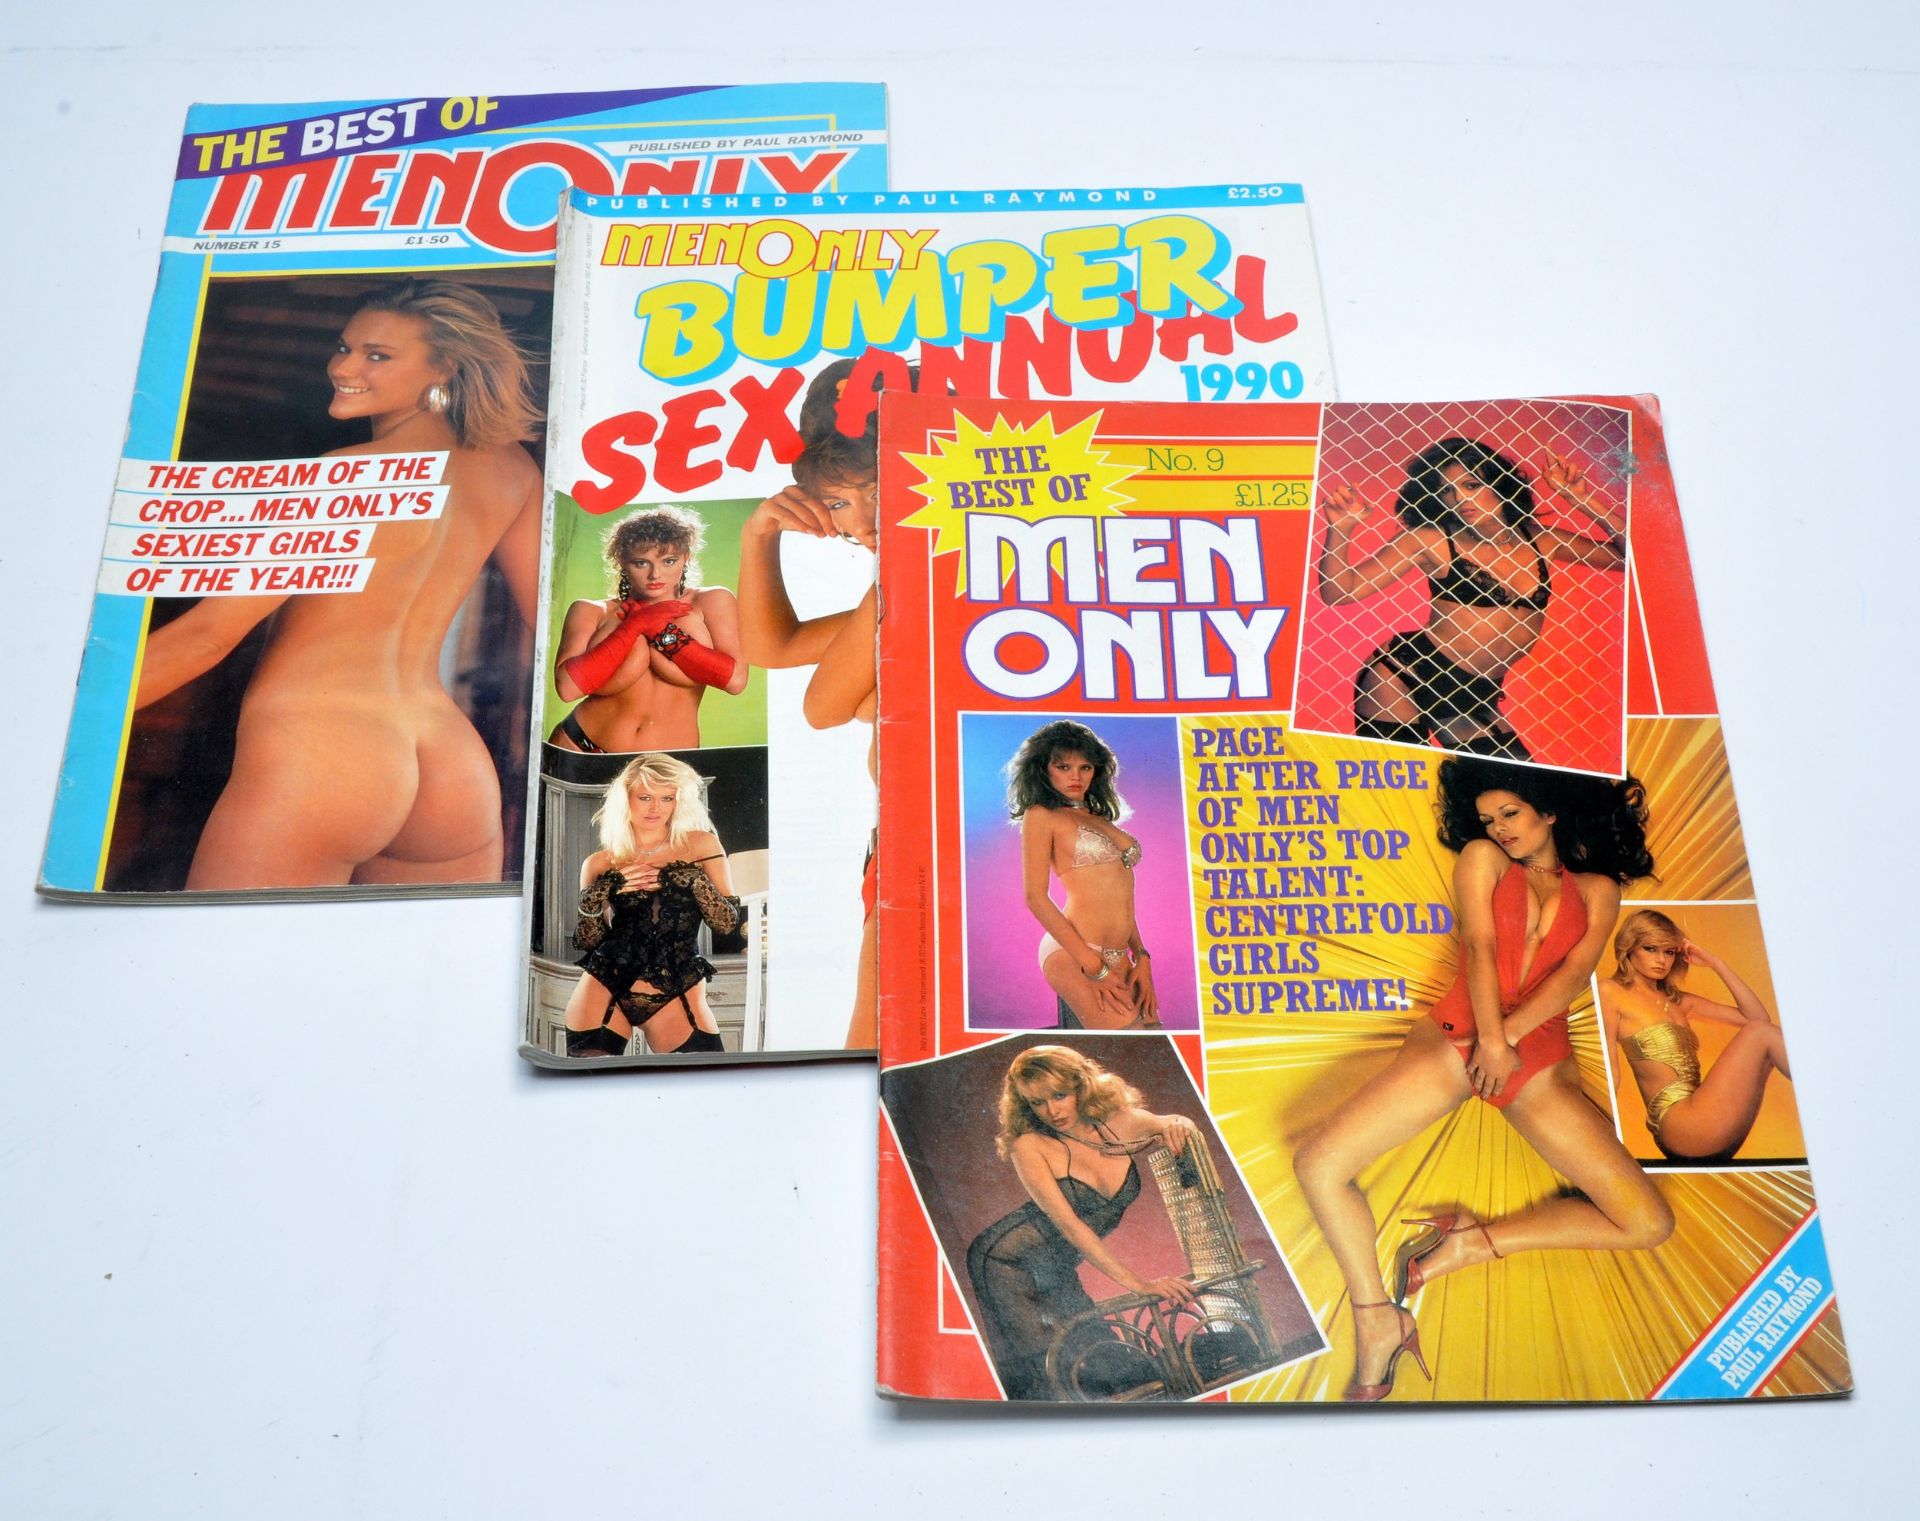 Adult Glamour Magazine / Vintage Erotica, comprising 3 issues of Men Only, specials. Please note